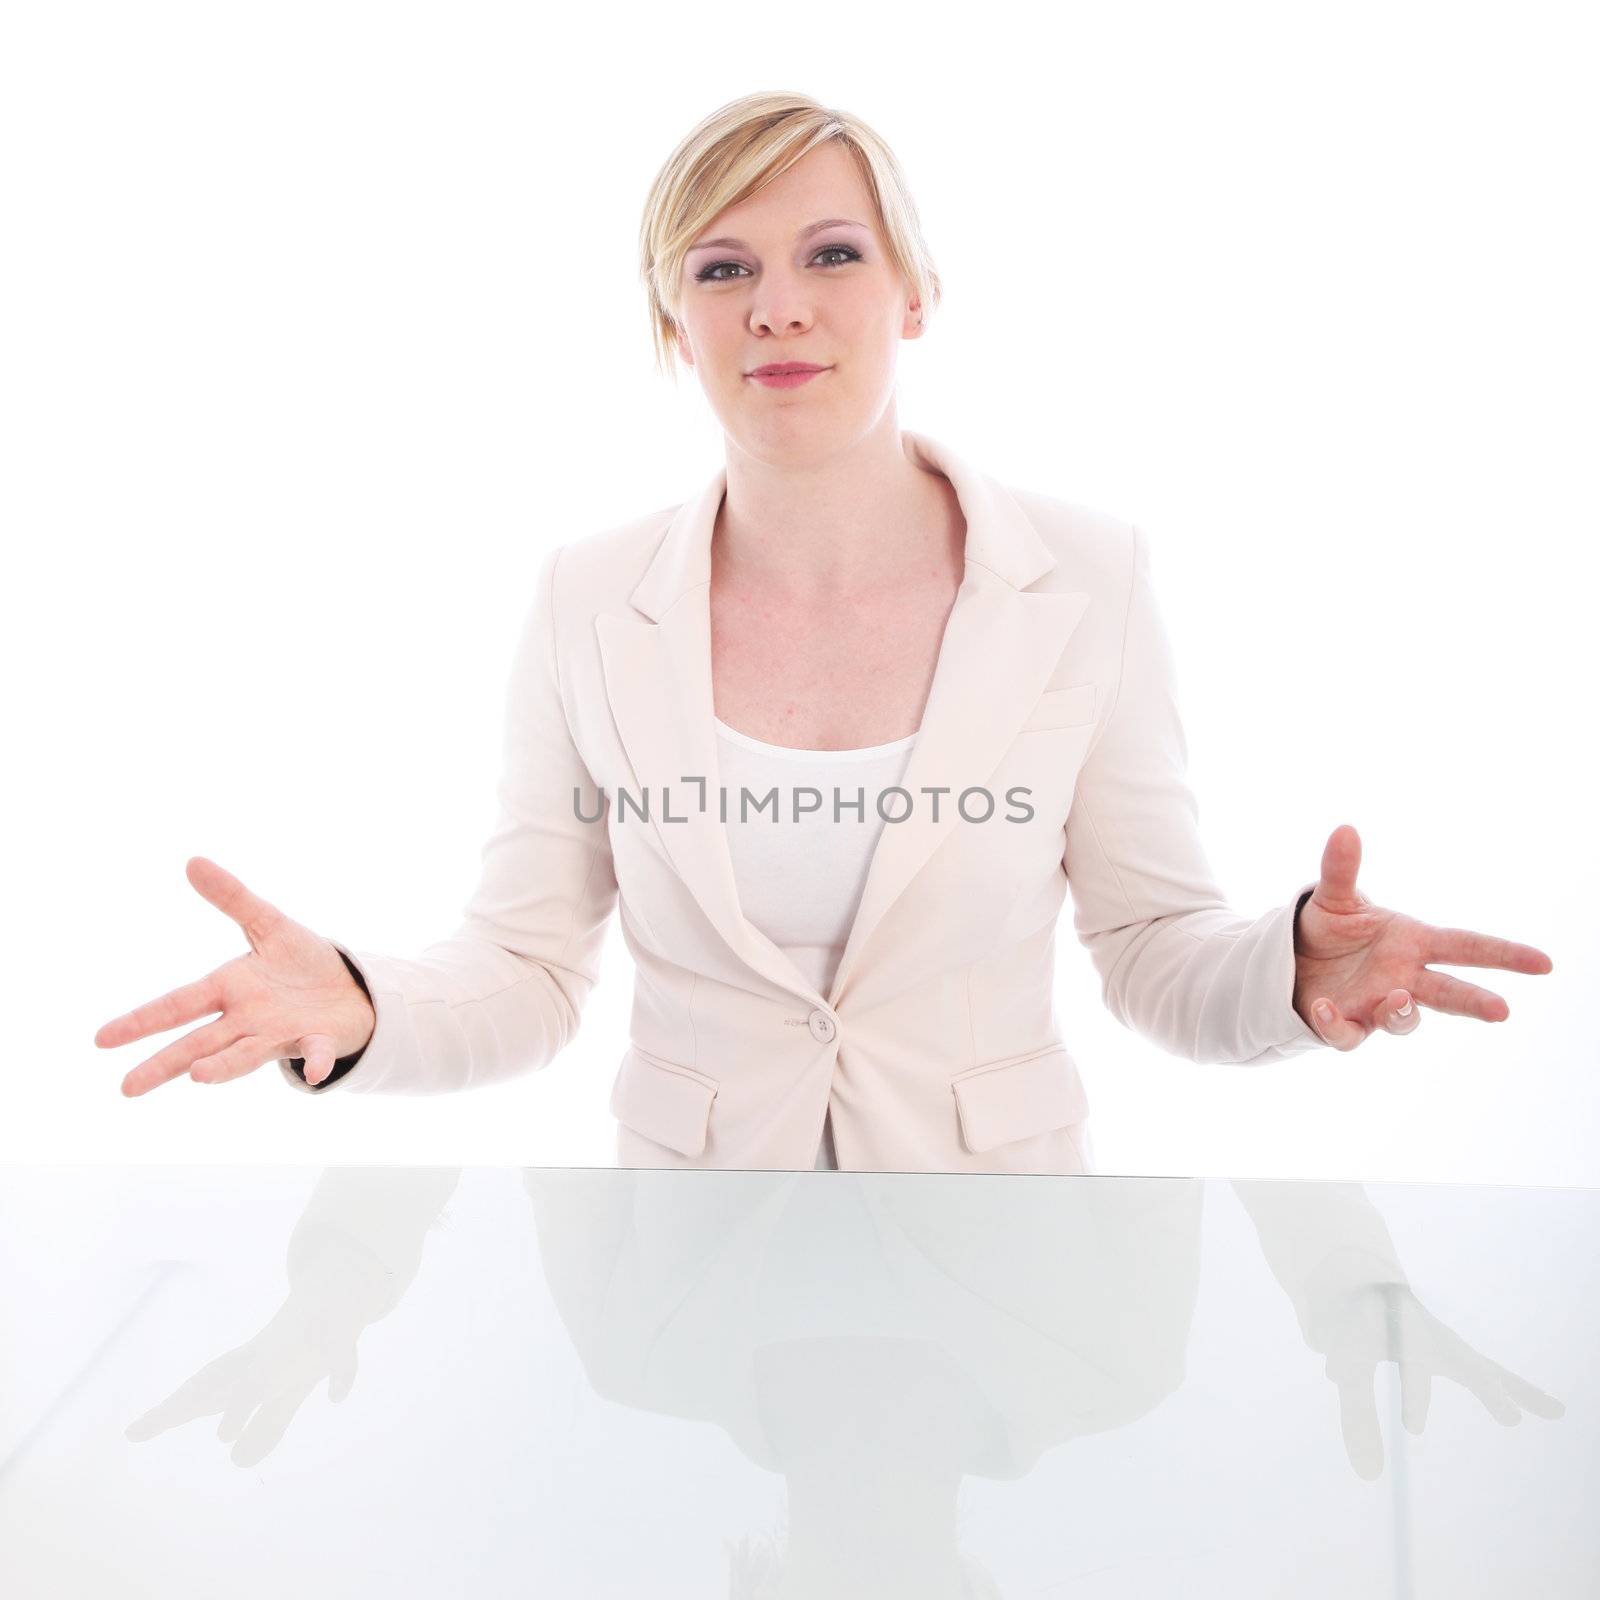 Eloquent young woman standing behind a reflective table pleading her case accompanied with expressive hand gestures on a white studio background